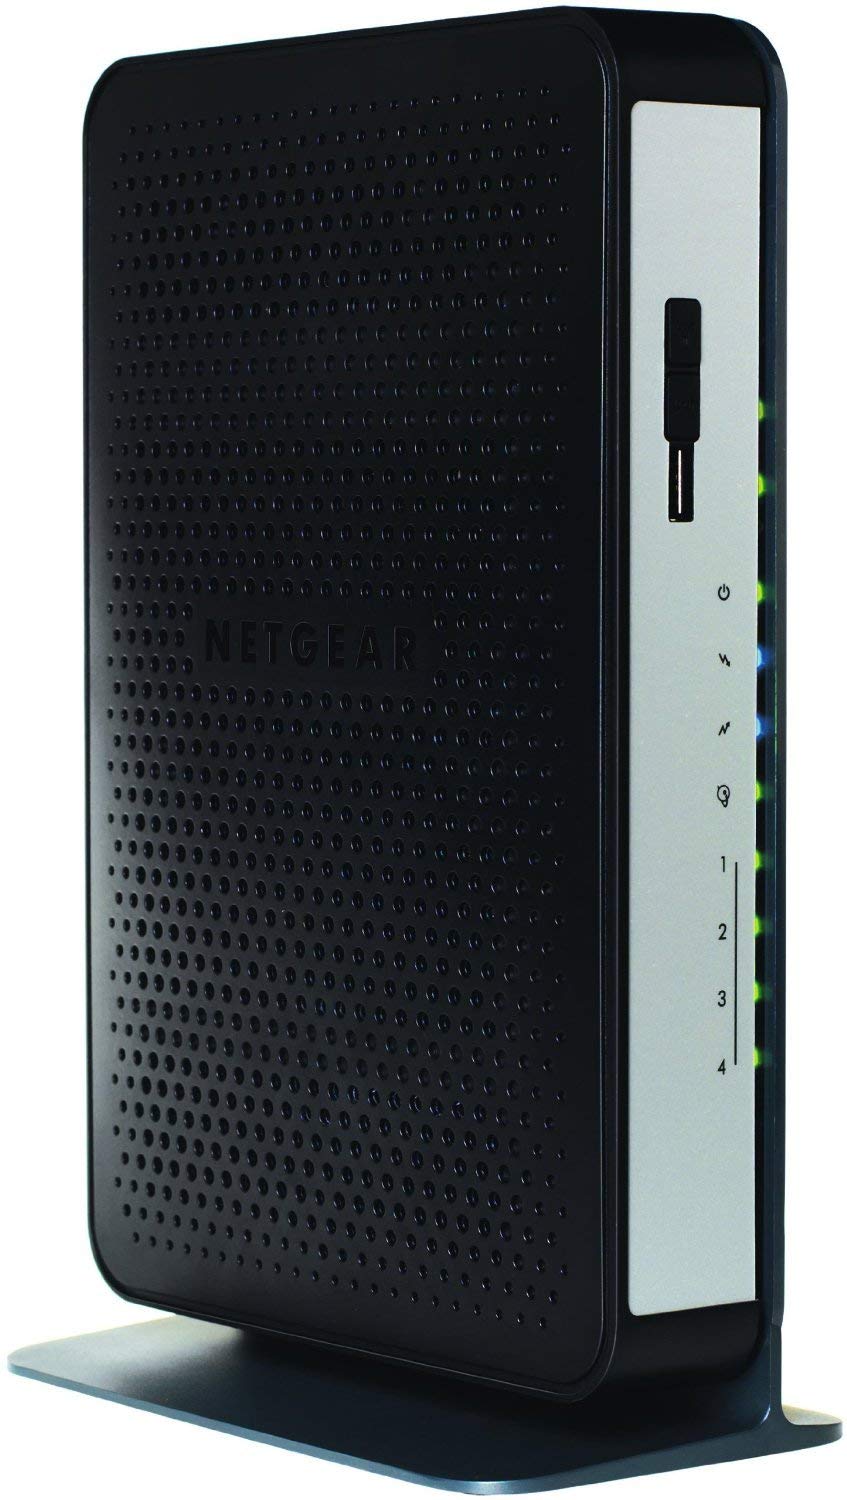 Netgear CG3000-1STAUS router with specifications